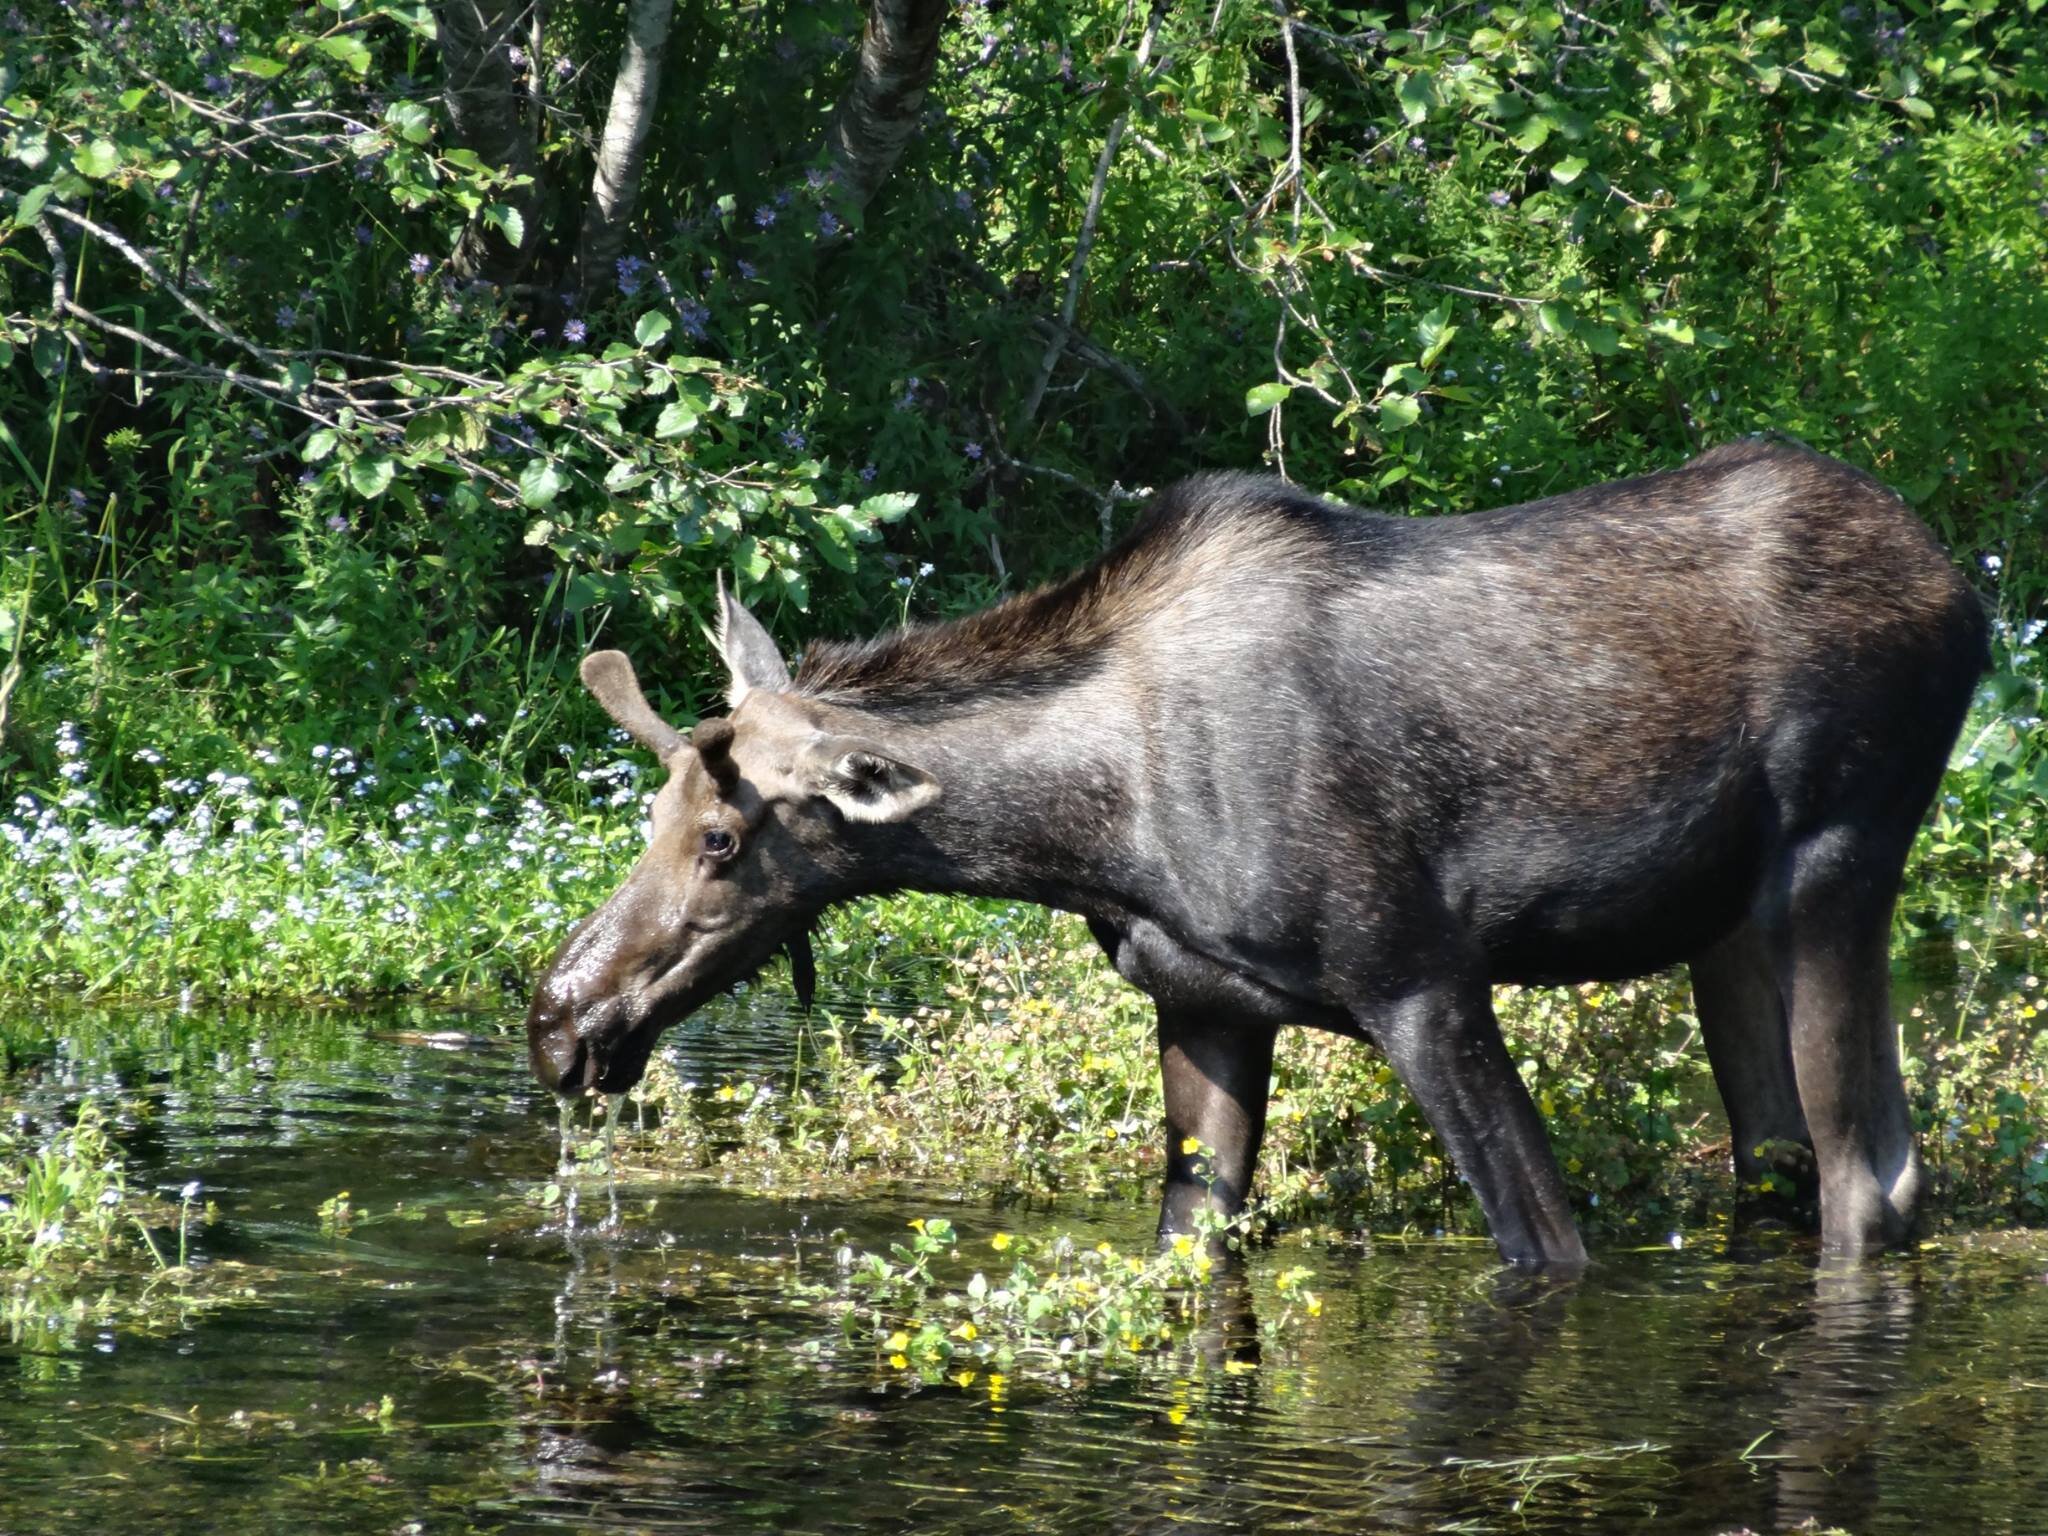 Moose drinking water at CDA River RV, Riverfront Campground